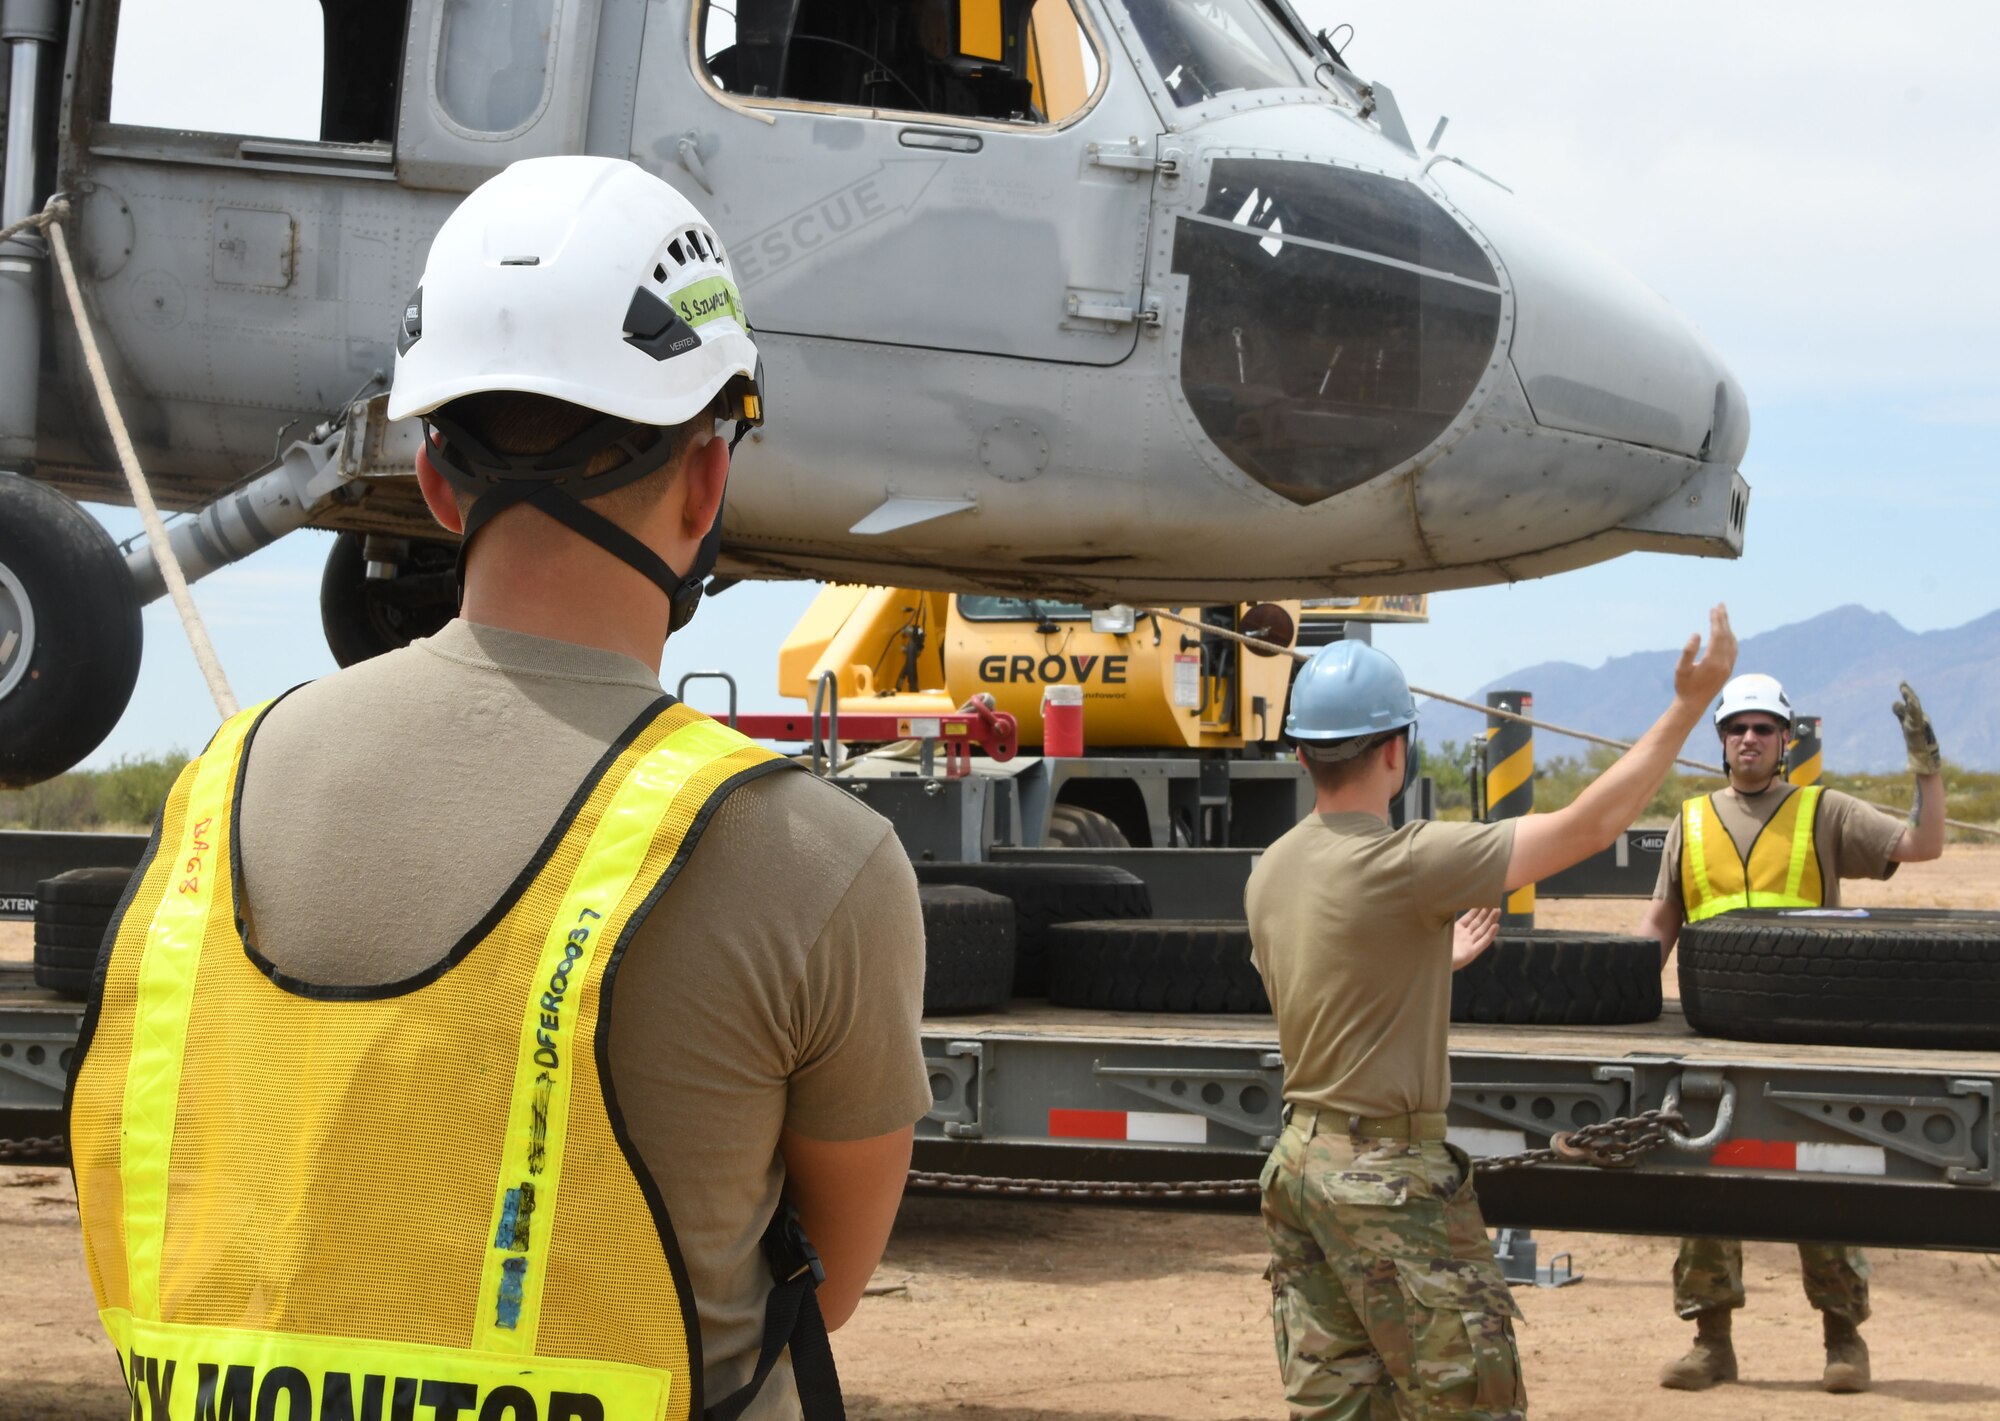 Airman guide a helicopter on a truck.